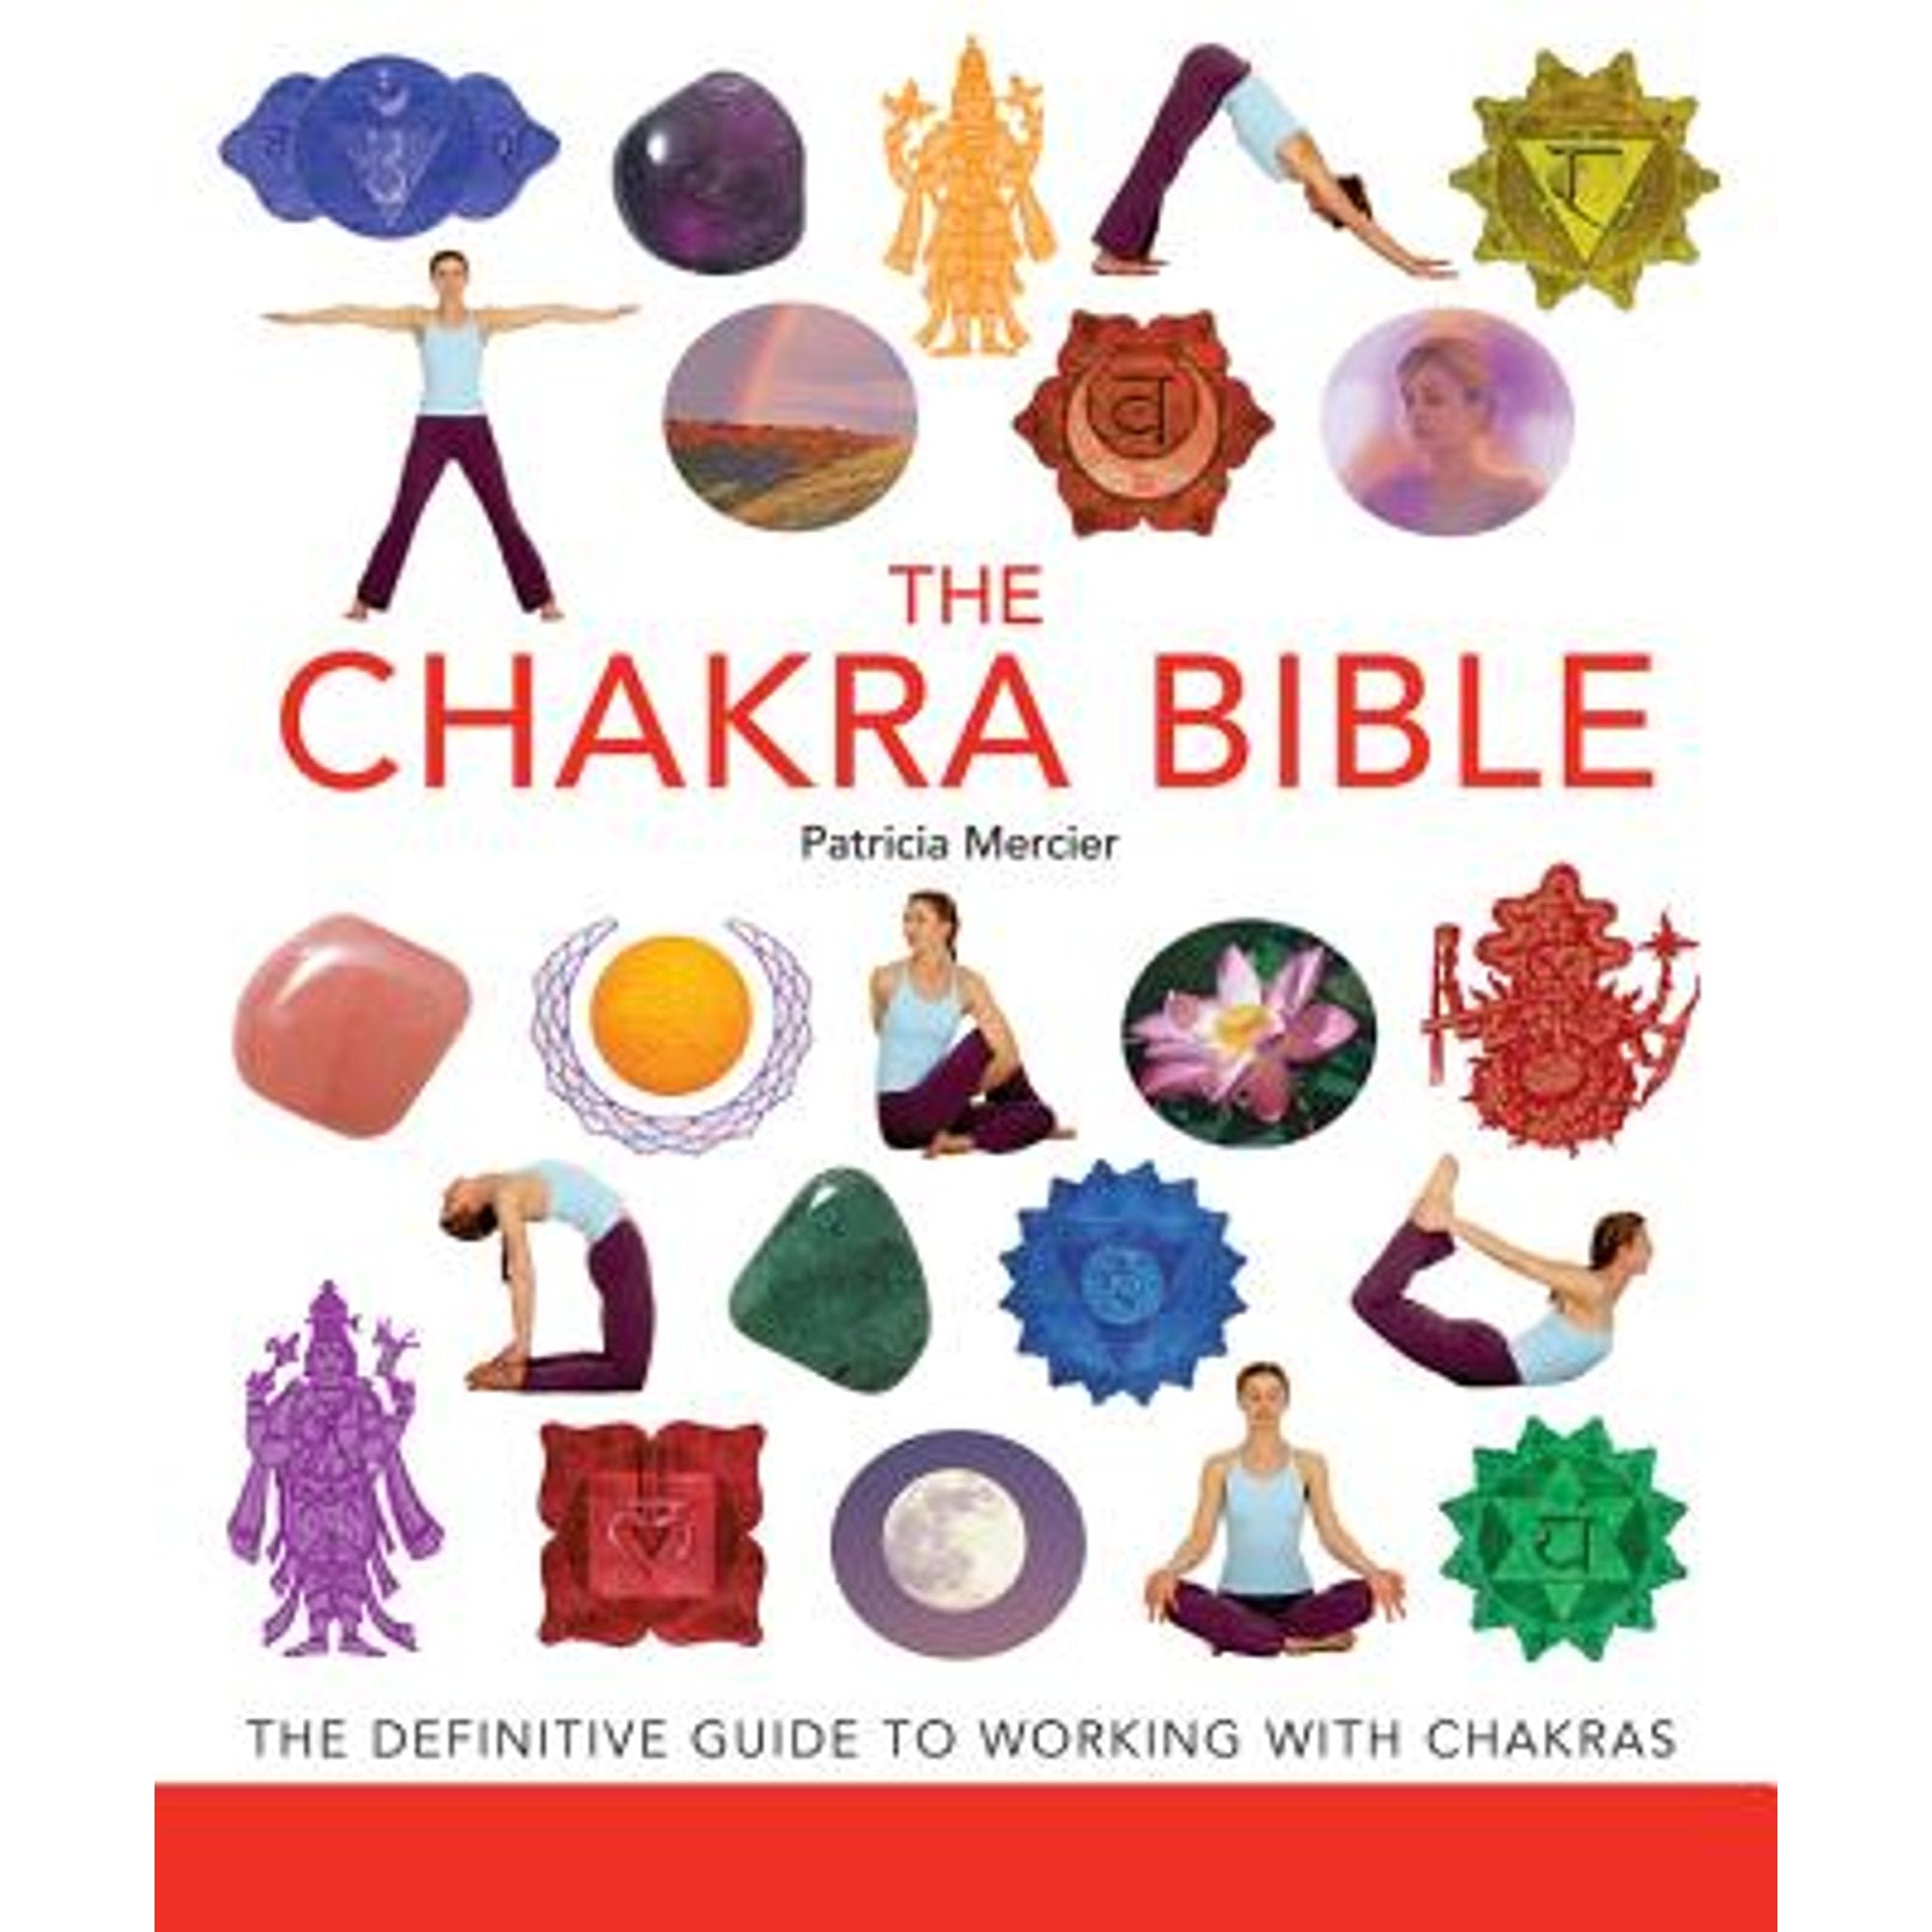 The Chakra Bible: The Definitive Guide to Working with Chakras Volume 11-hotRAGS.com